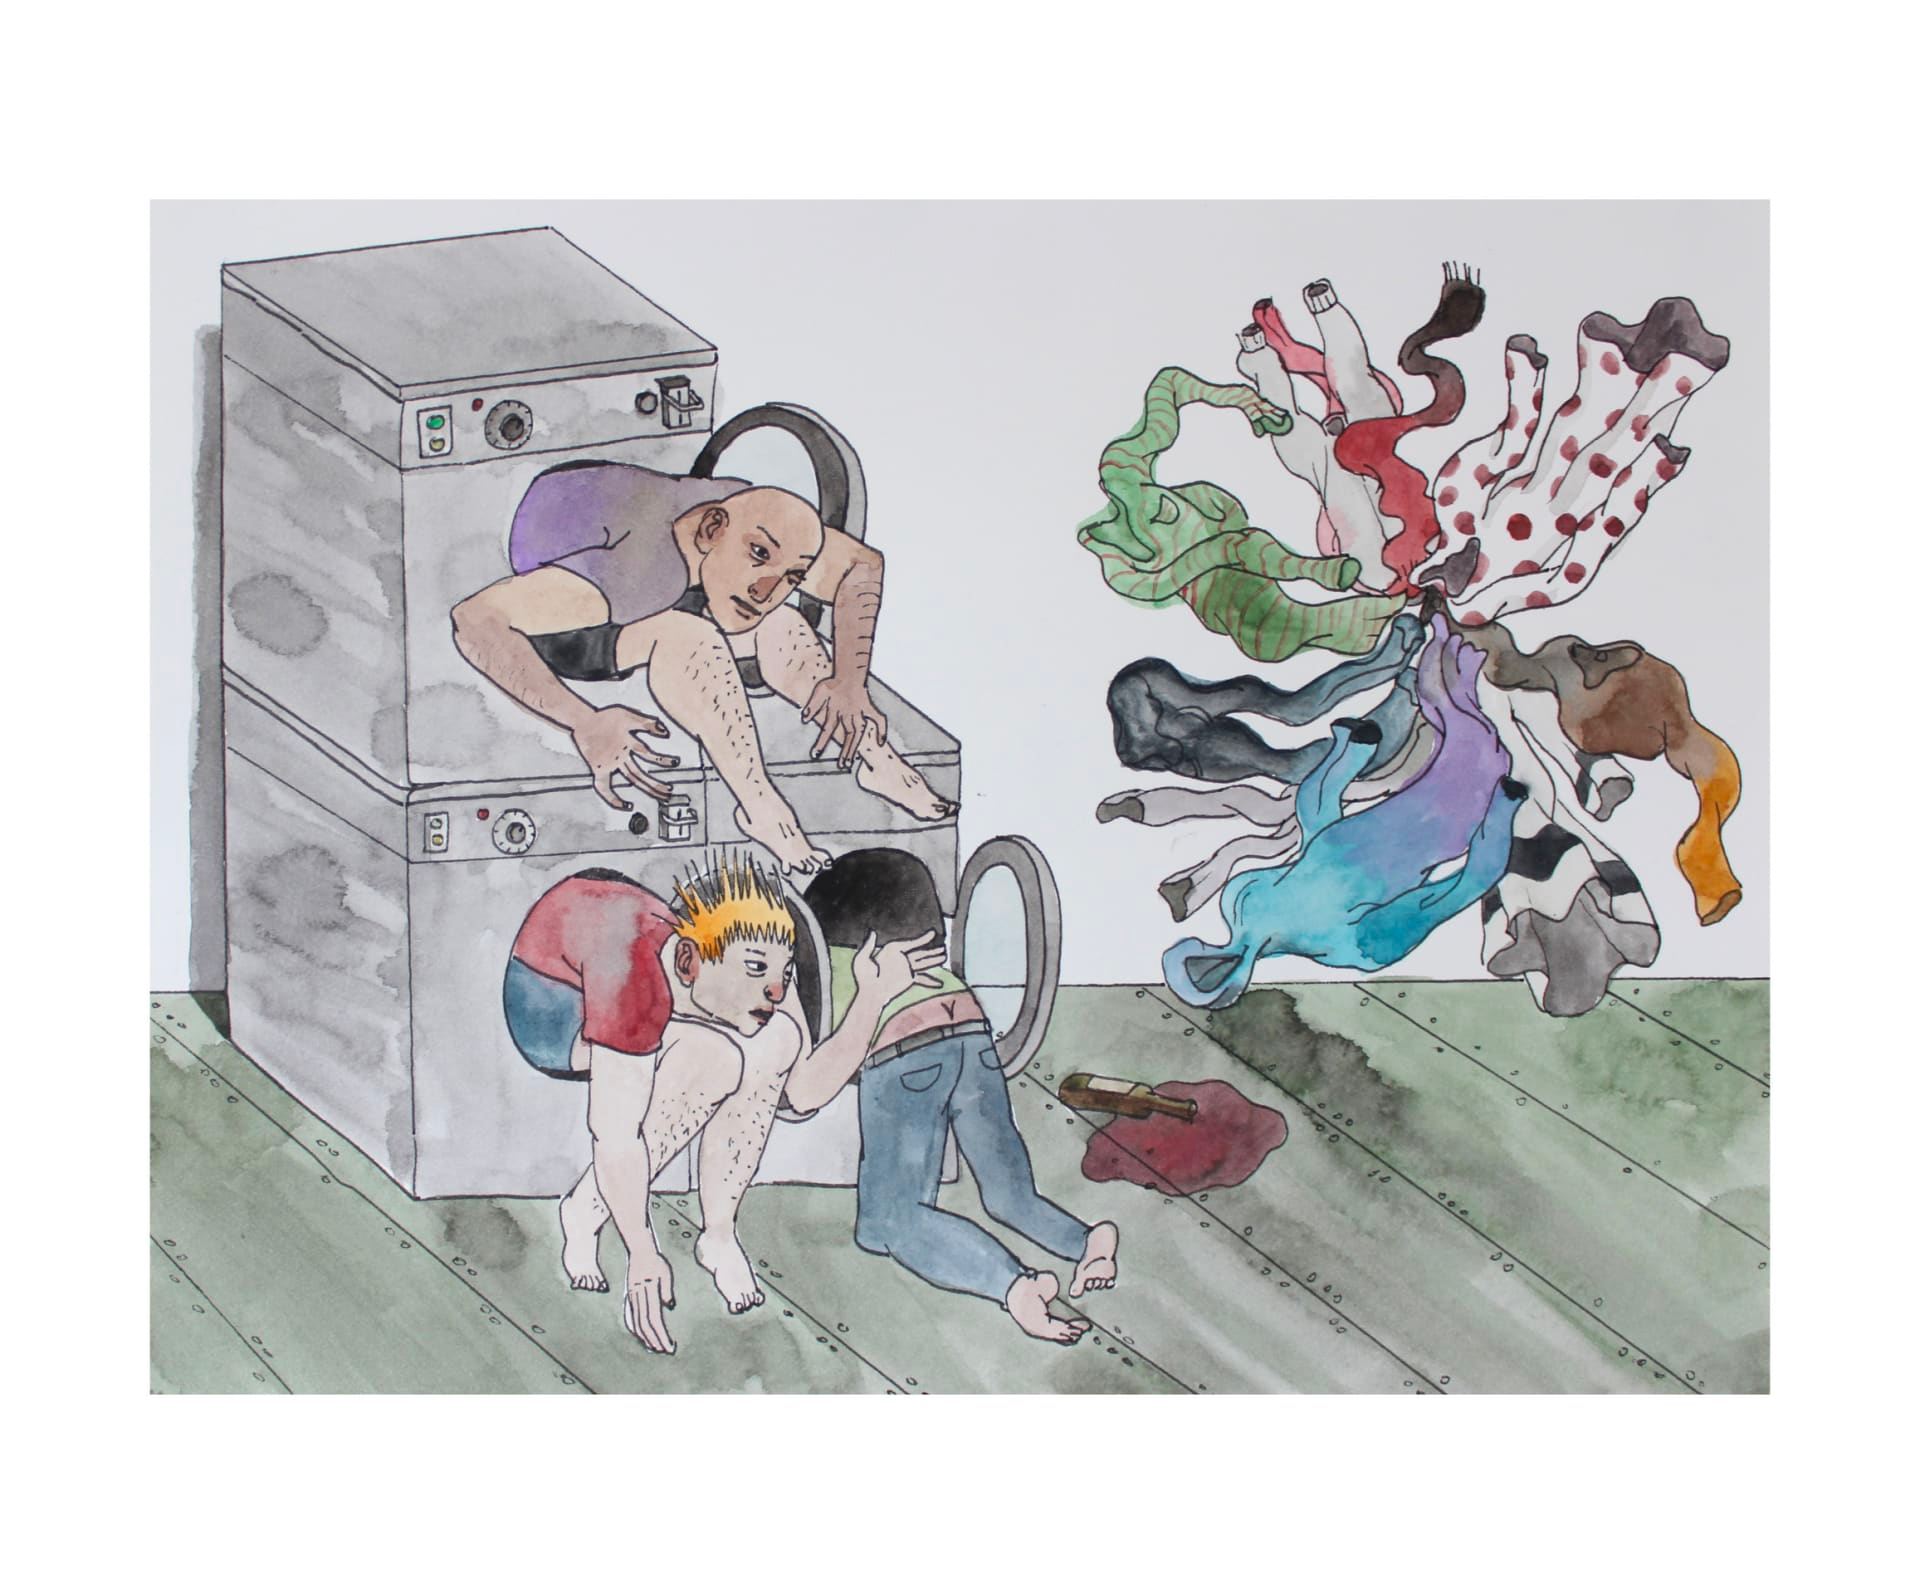 Image of three people climbing in or out, or stuck, in three washing machines or dryers, with a spilled bottle of red wine nearby and a jumble of clothes, swirling in the air next to them.